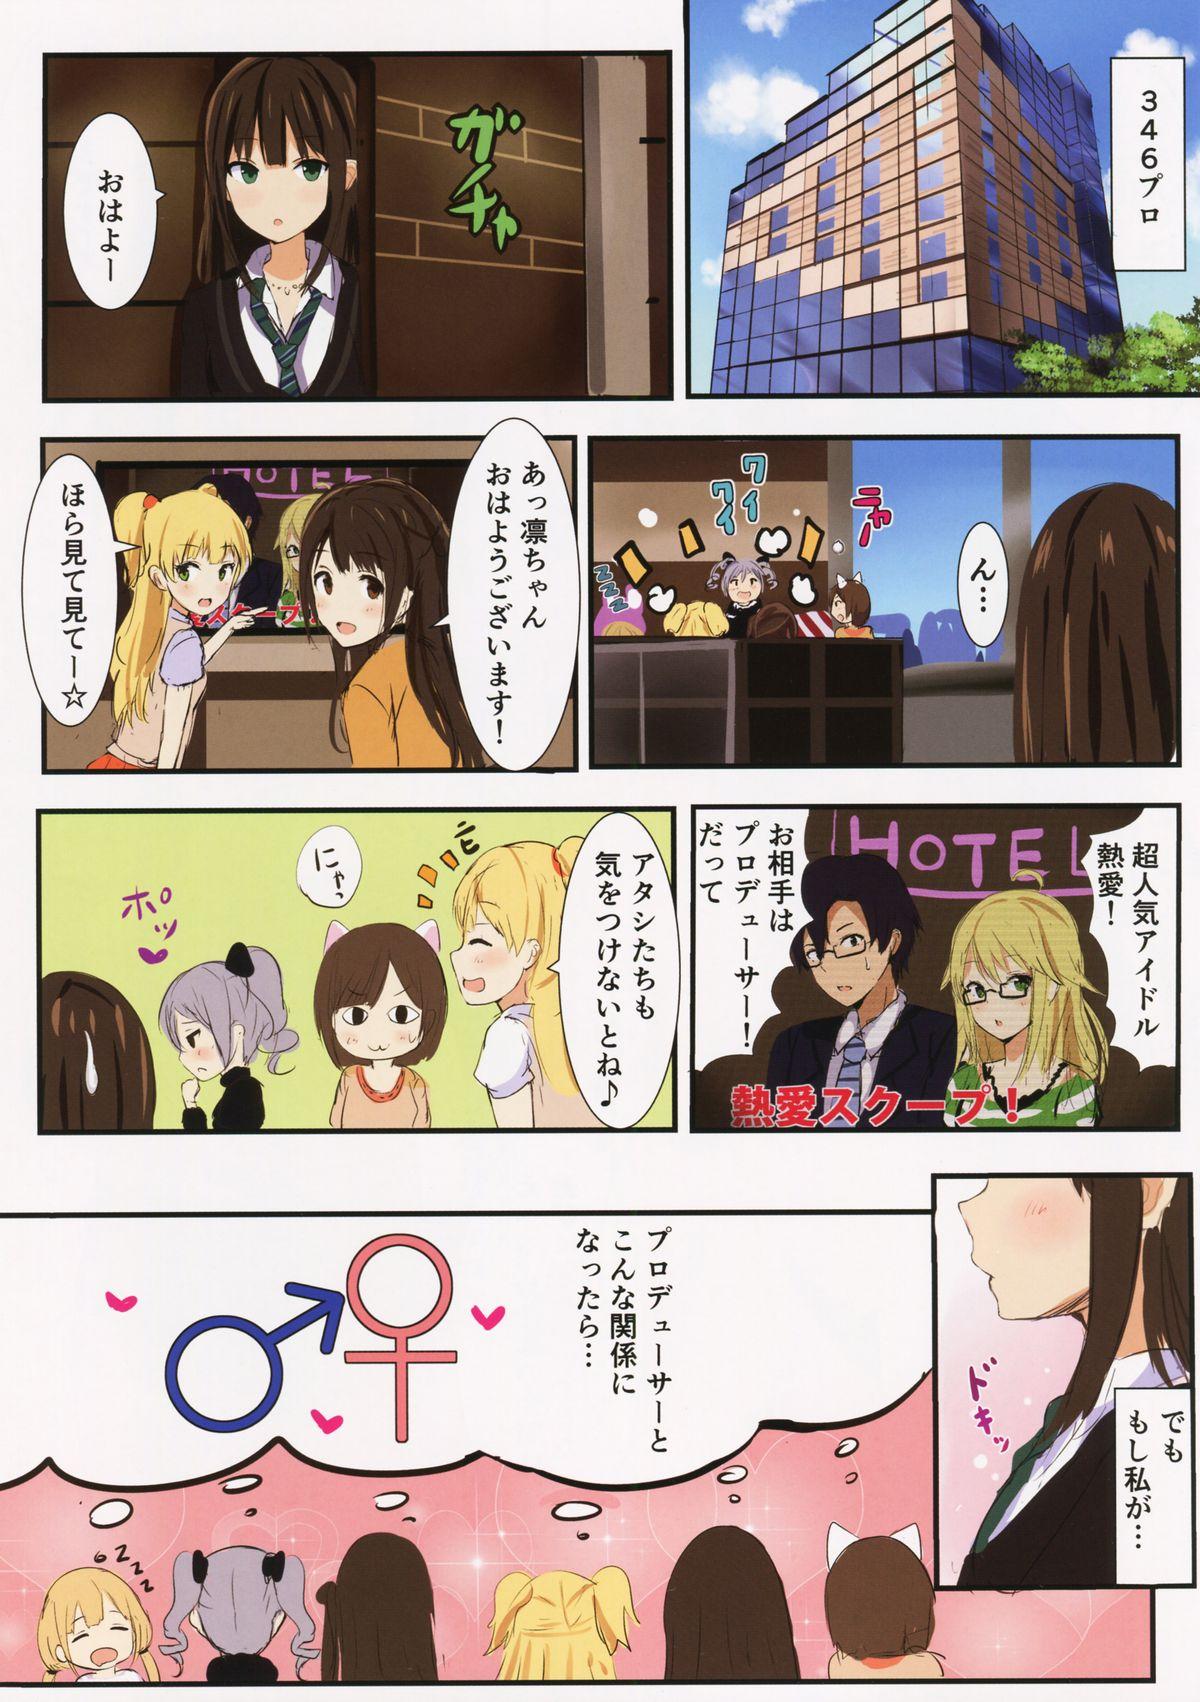 Married CINDERELLA R18 Selection - The idolmaster Nylons - Page 2